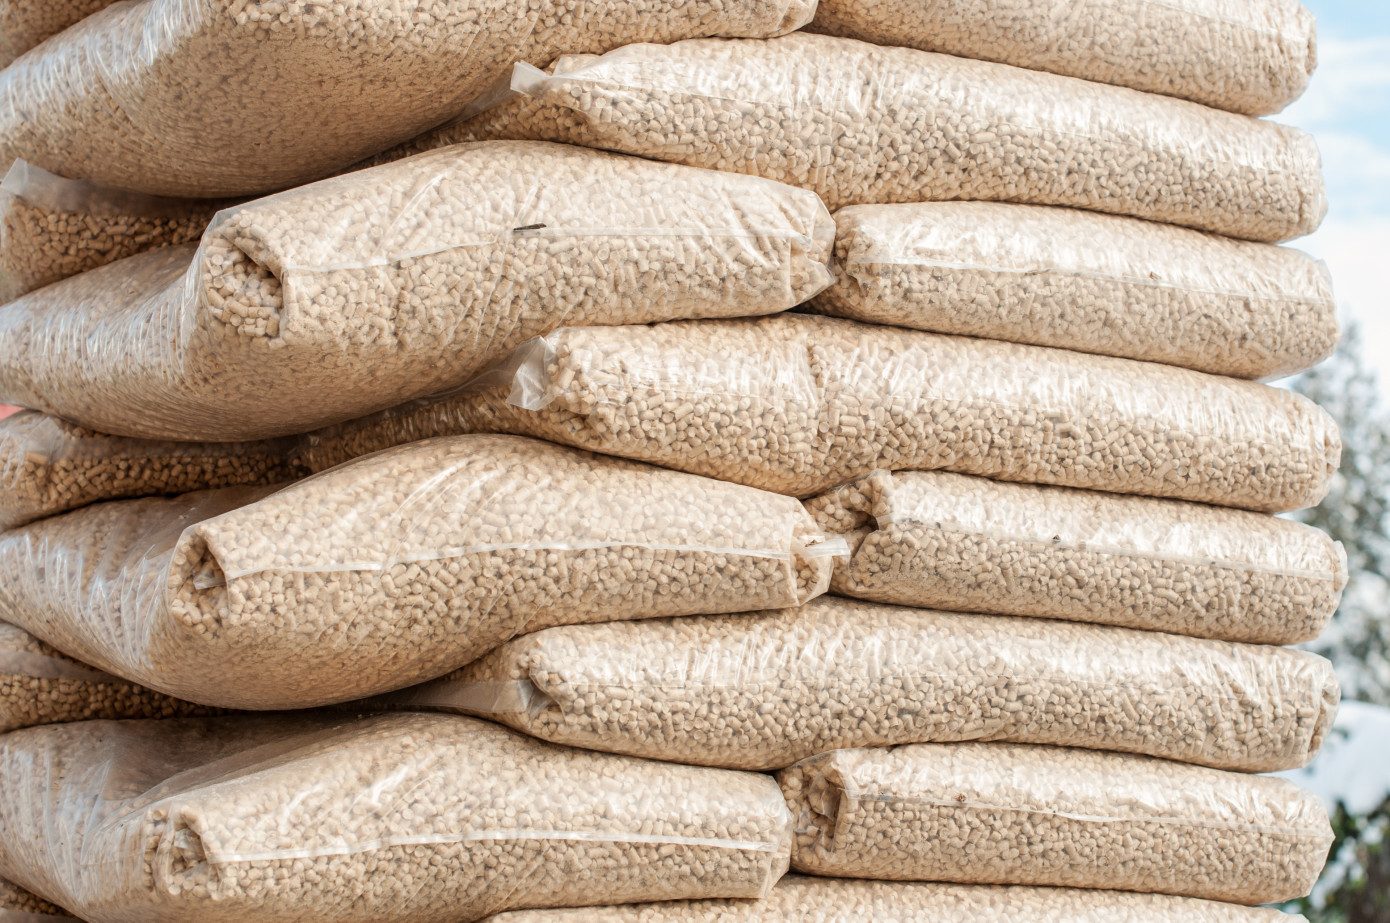 Japan increases imports of wood pellets by 42% in July